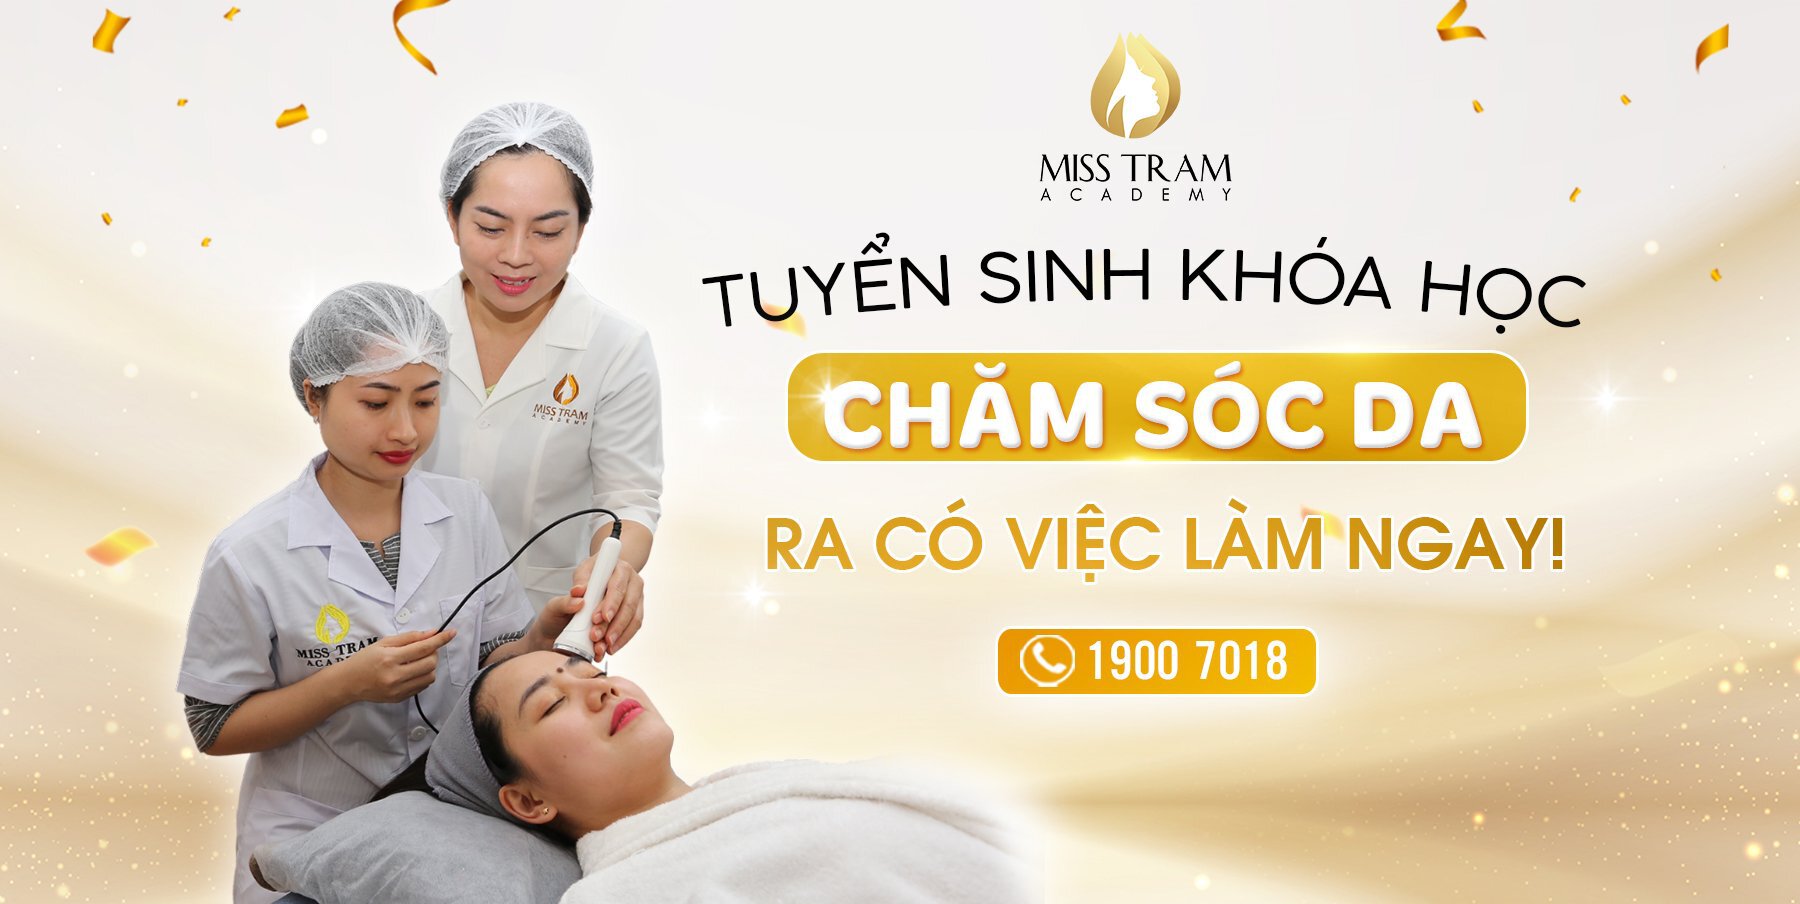 The course of skin care and treatment is trusted by many students